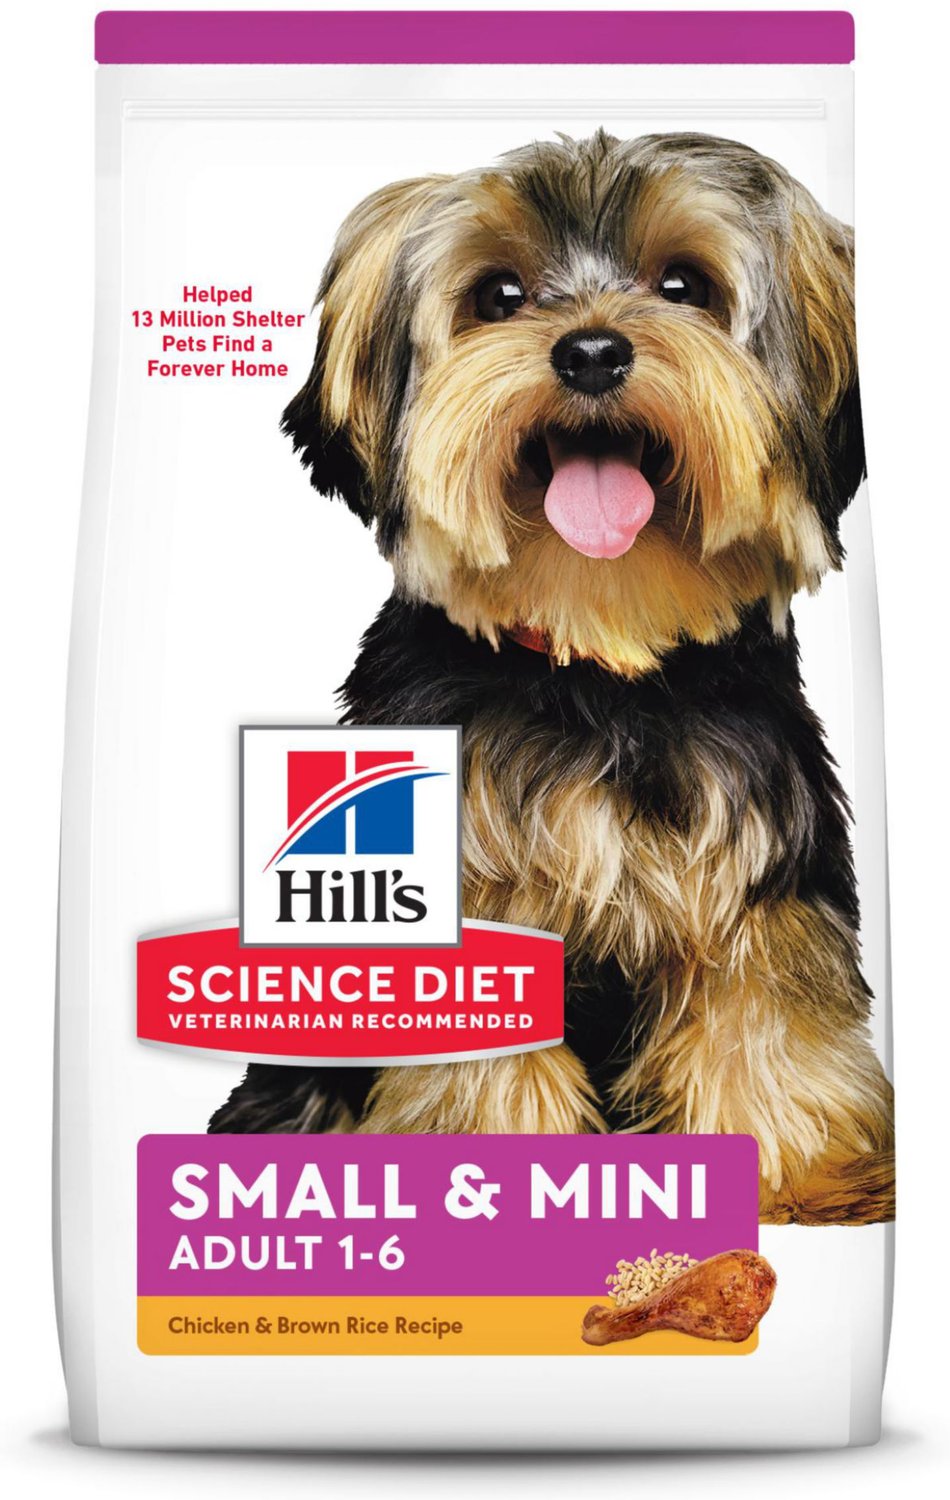 Hill's Science Diet Small Paws Chicken Meal & Rice Recipe